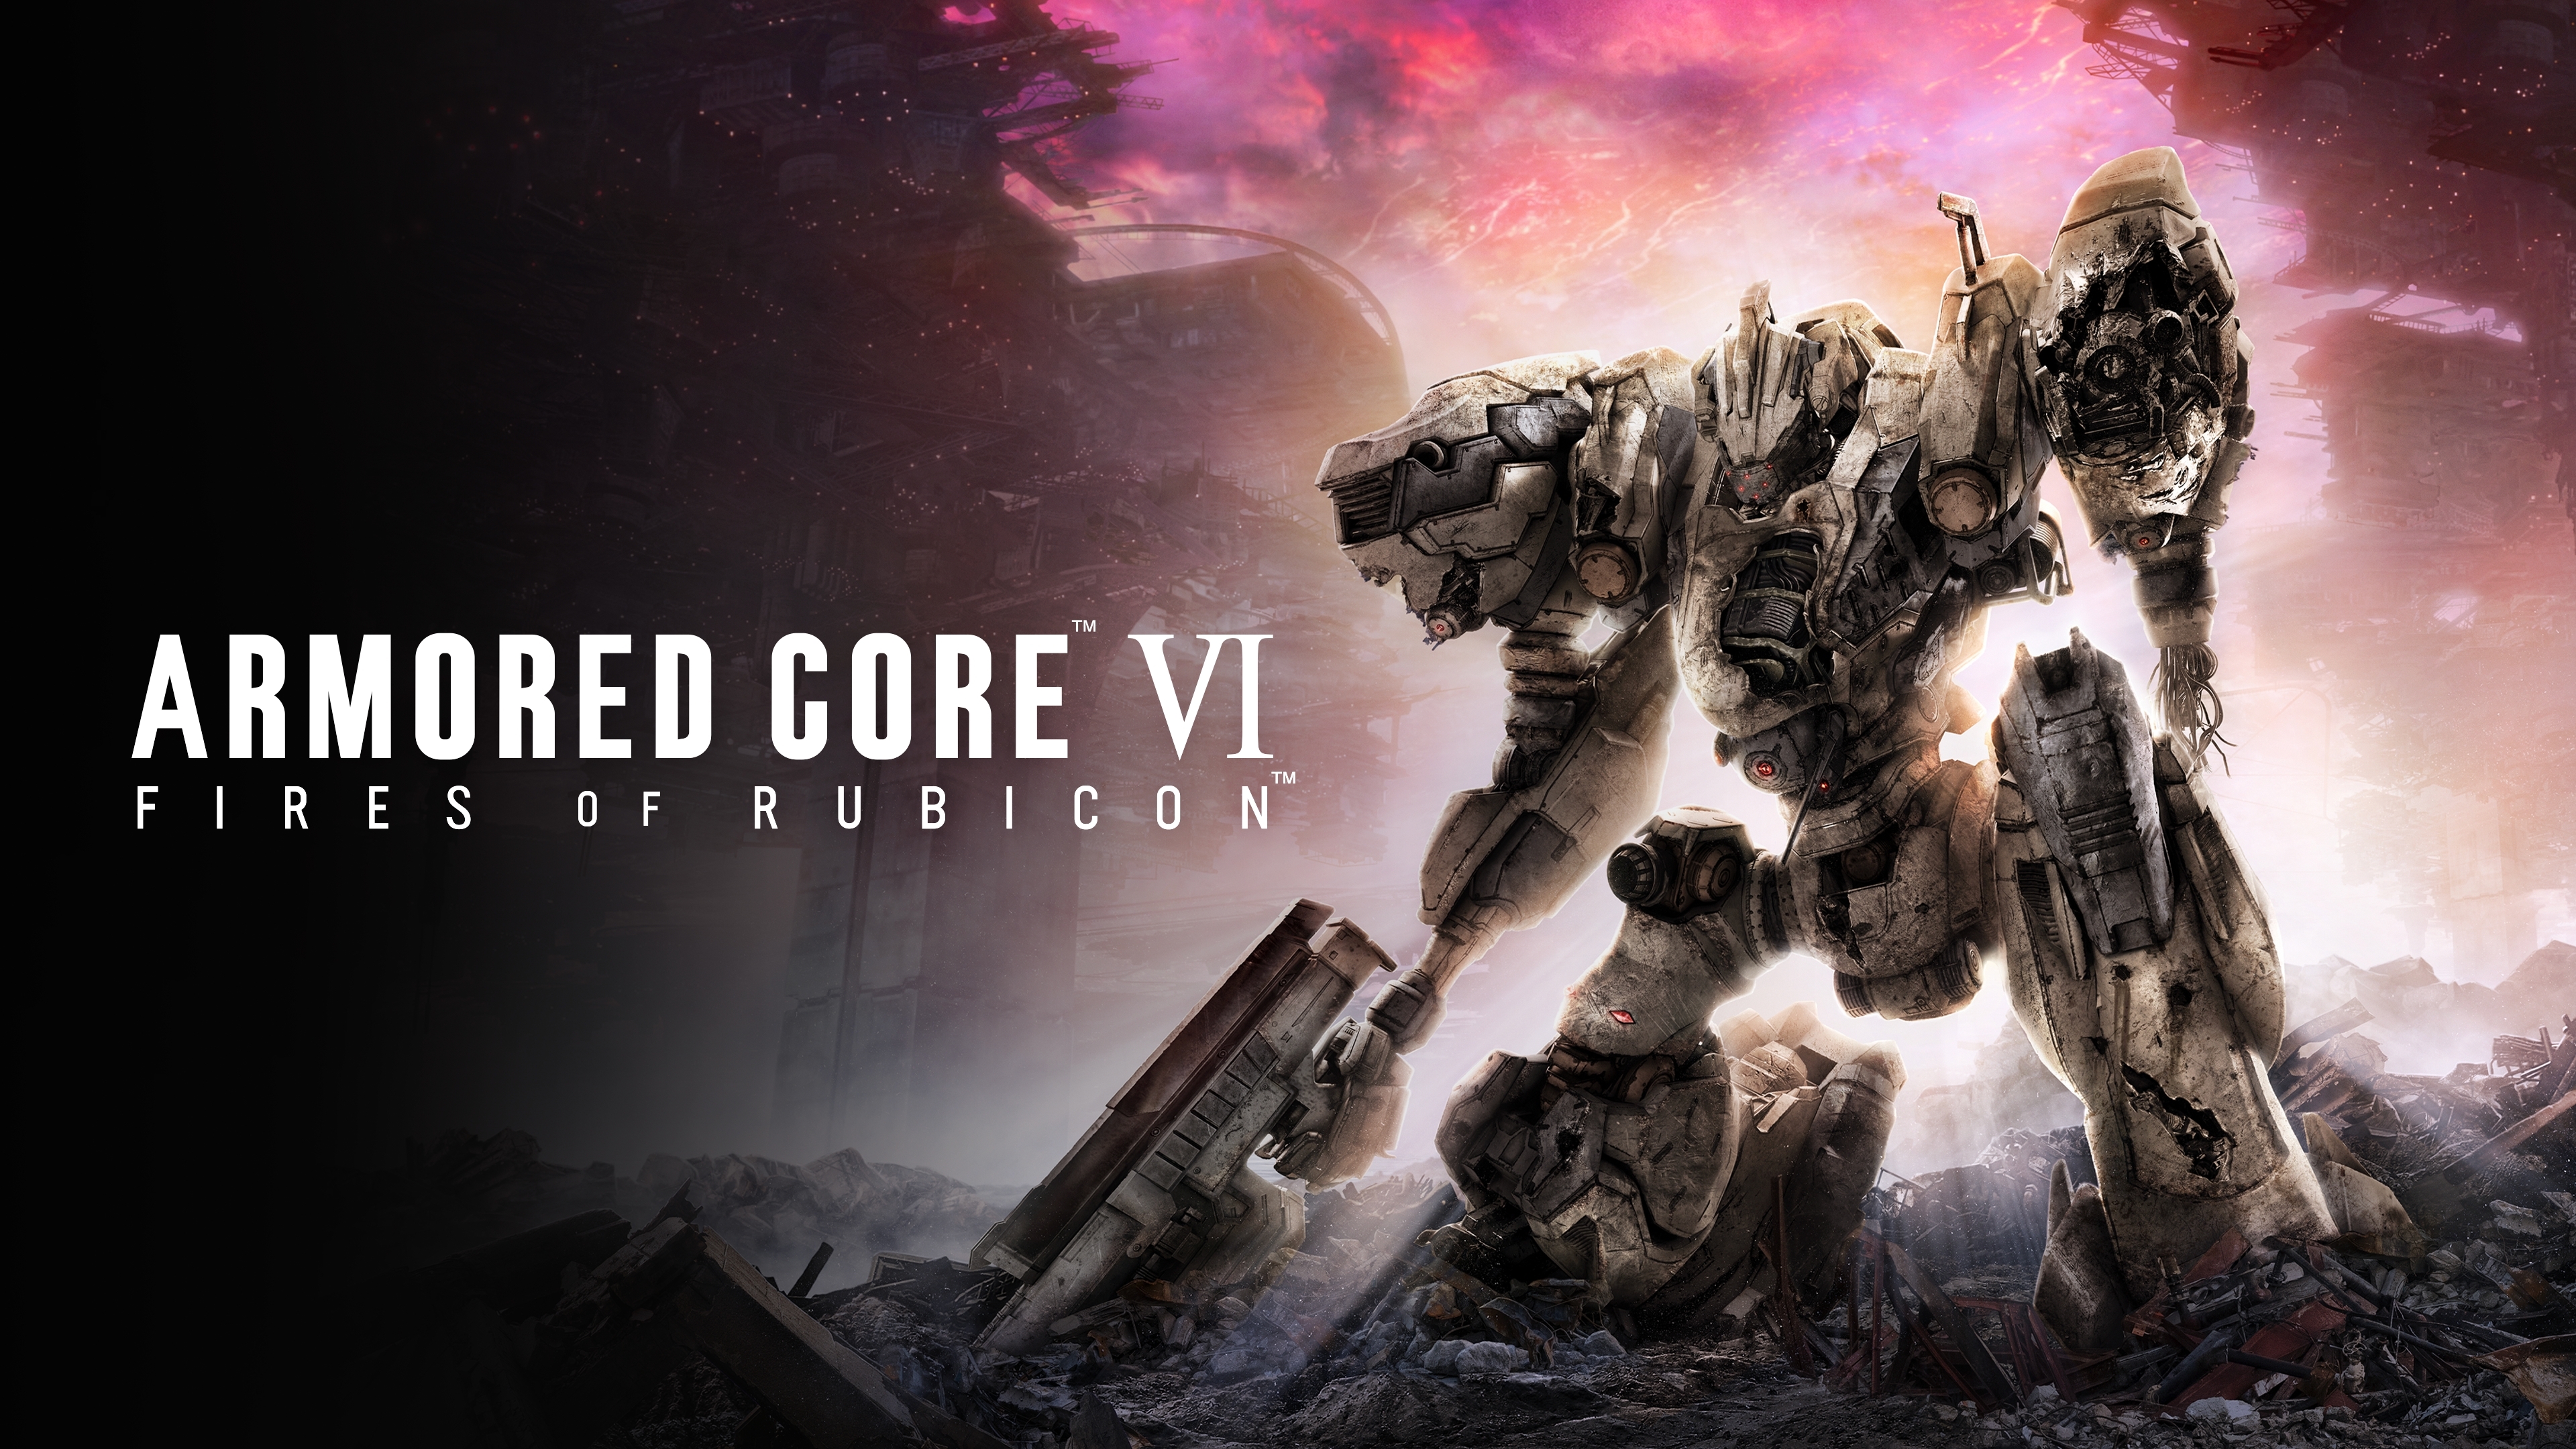 Armored Core PS5, Video Gaming, Video Games, PlayStation on Carousell